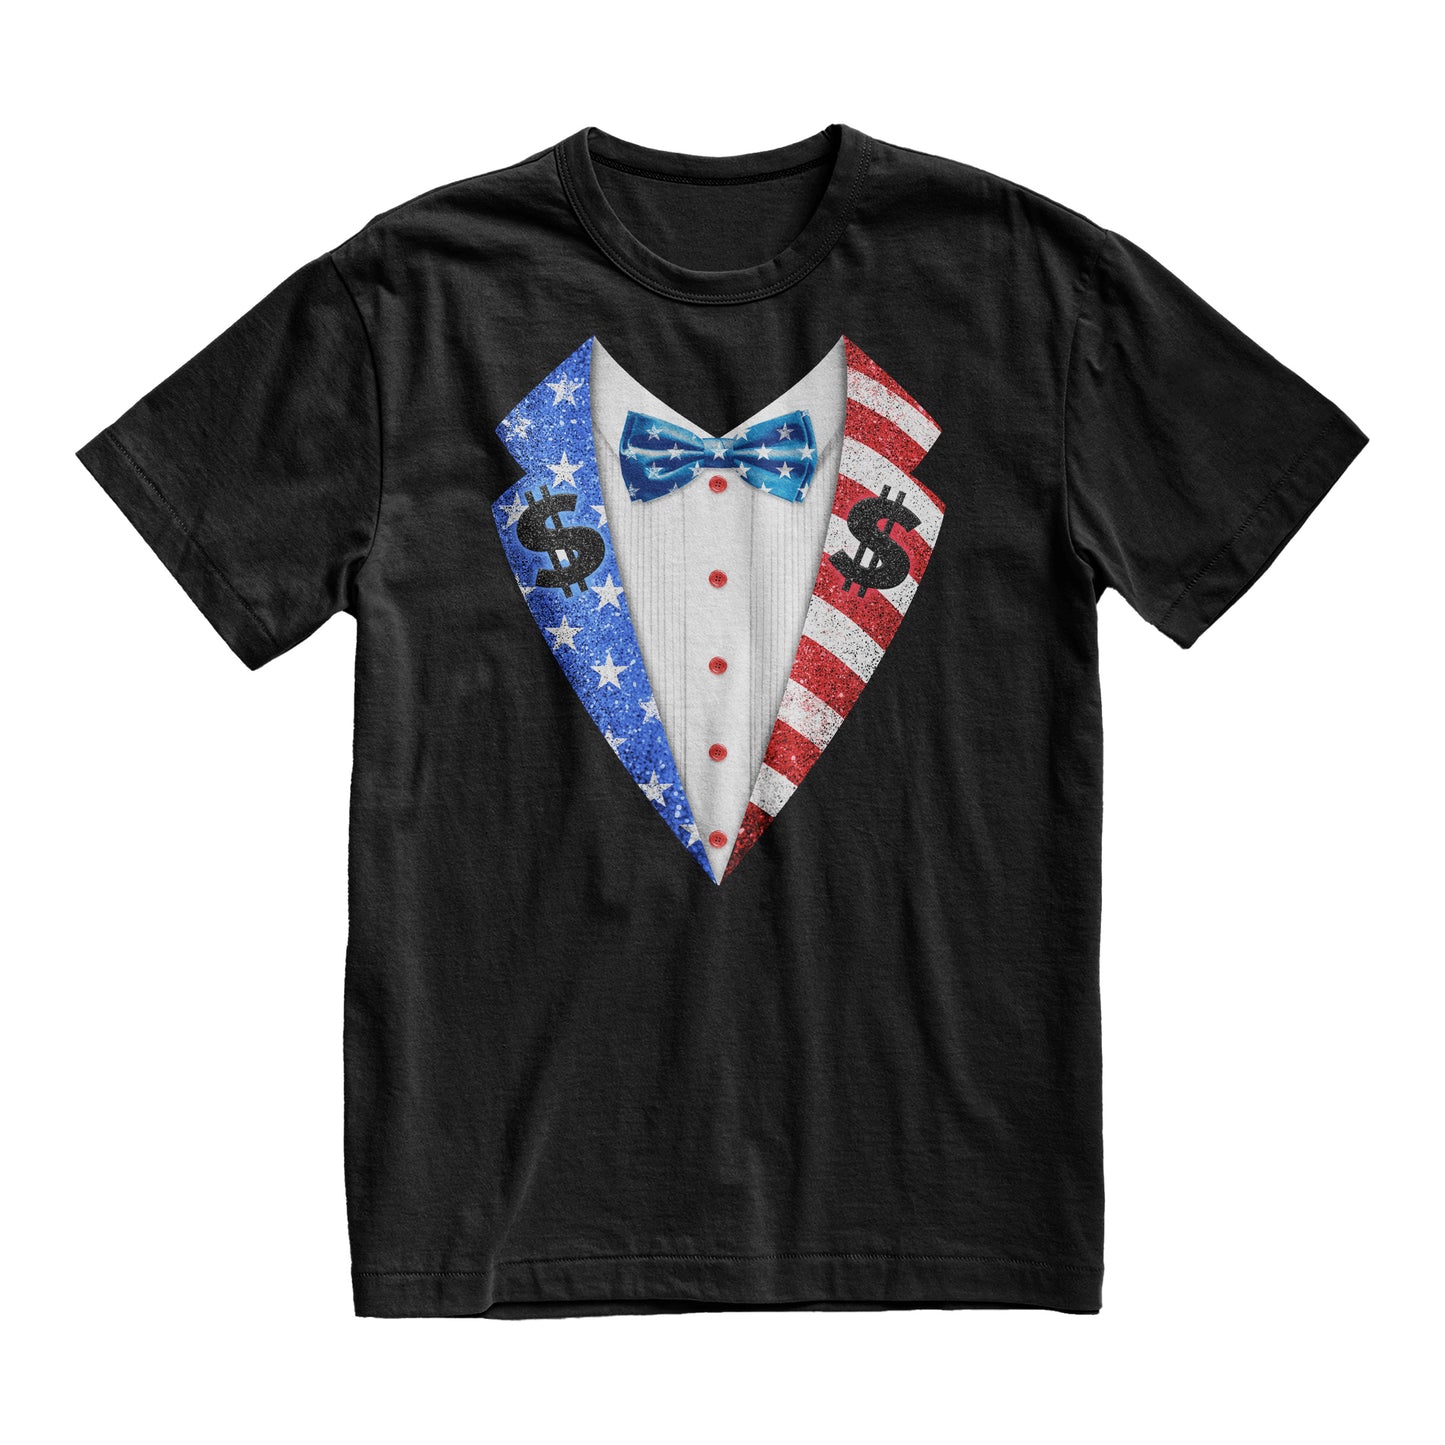 Ted DiBiase - Red, White, & Blue Suit Tee